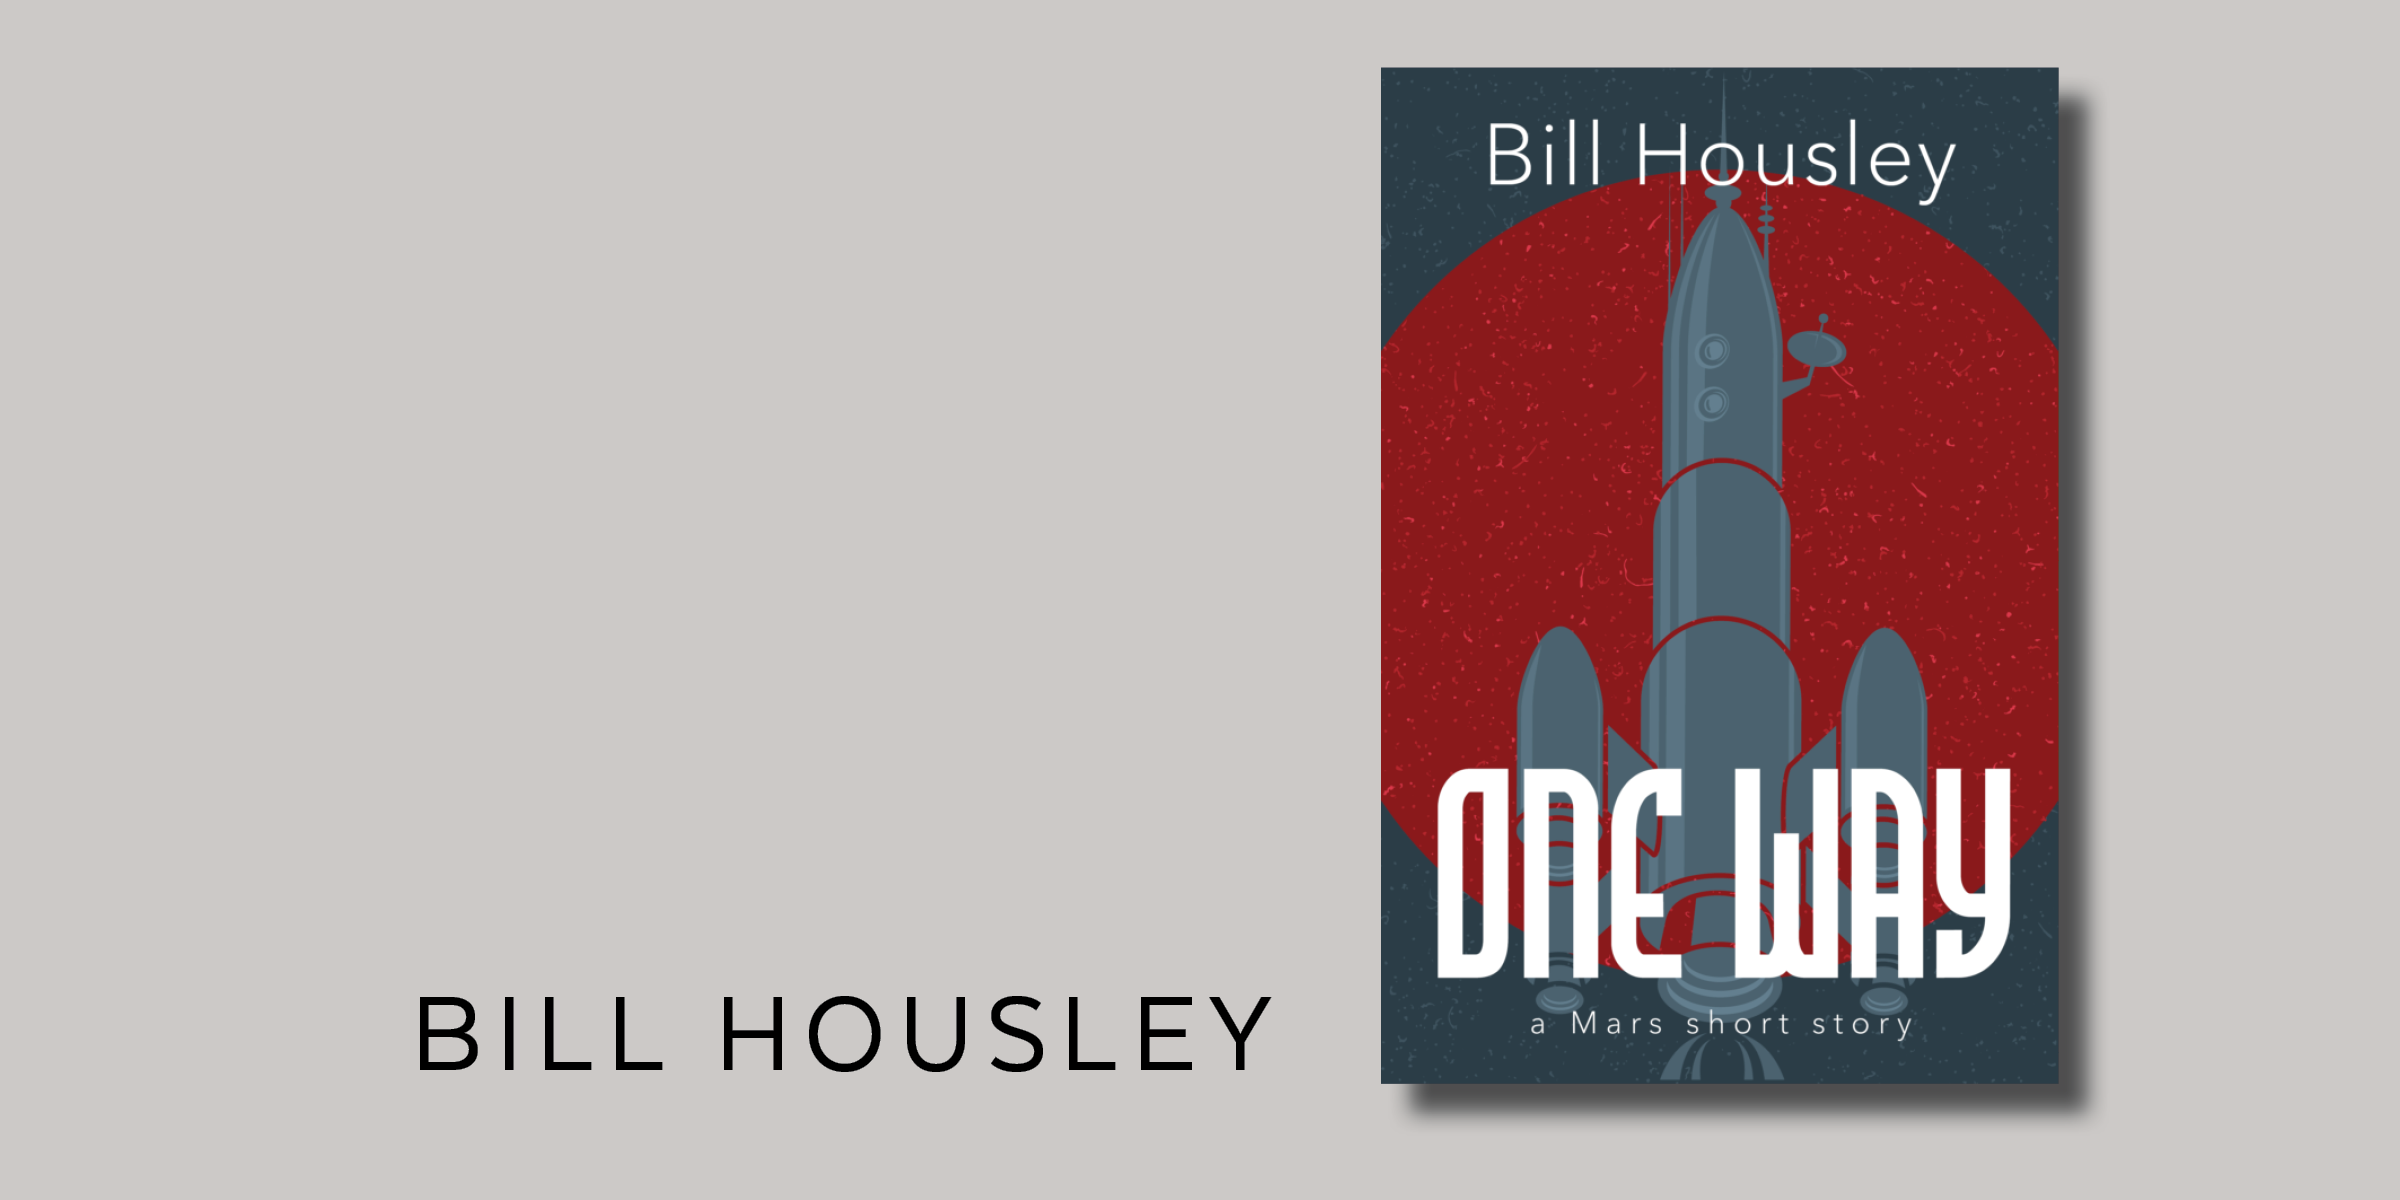 Cover design for Bill Housley's "One Way"